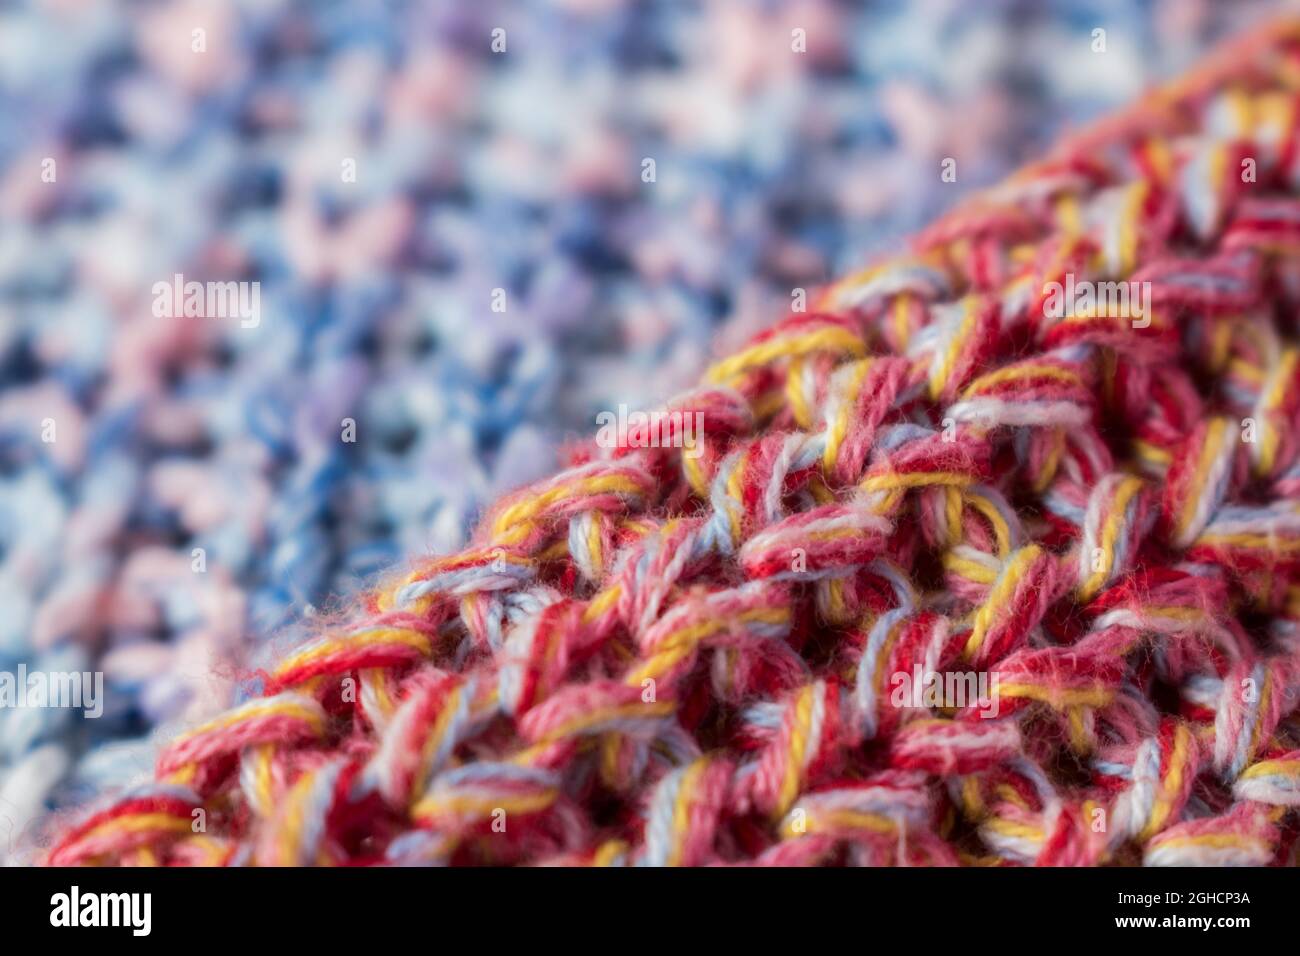 Close up of pink and yellow knitted wool texture of a sweater Stock Photo